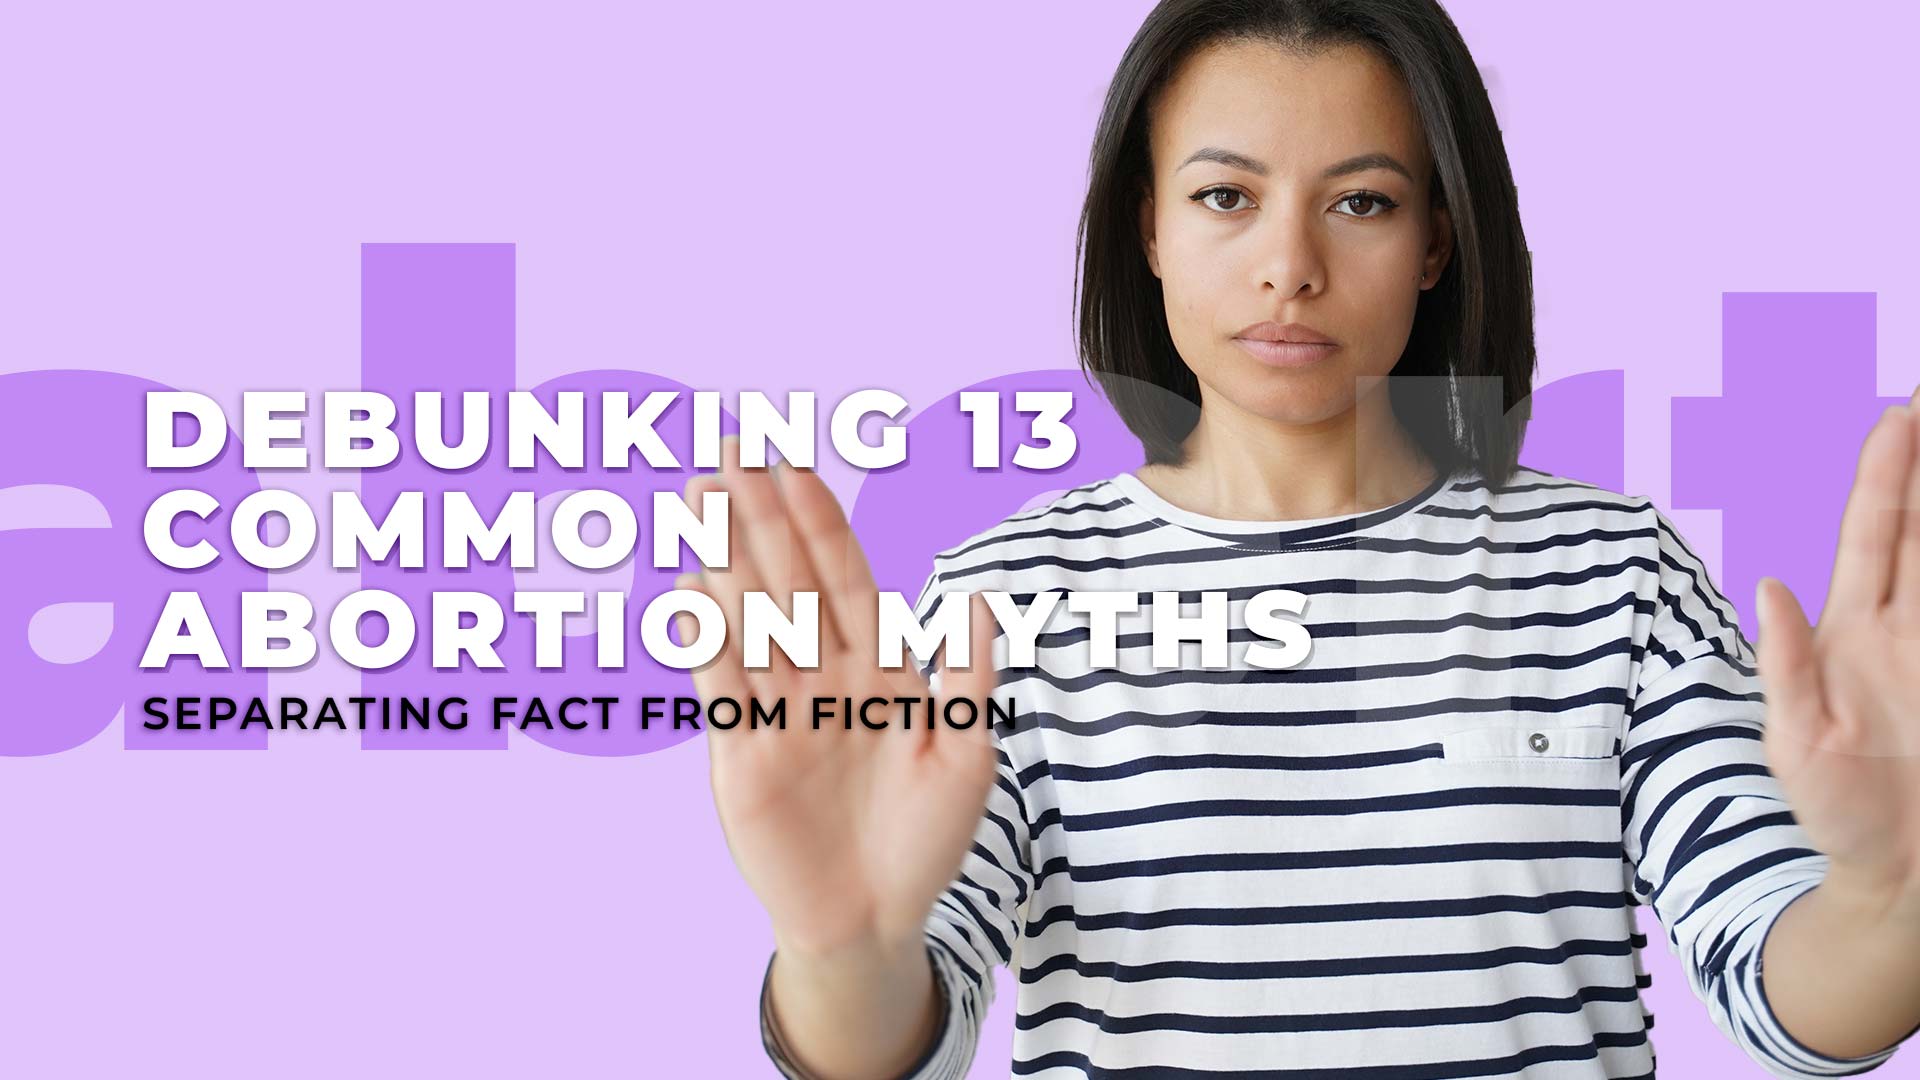 Debunking 13 Common Abortion Myths: Separating Fact from Fiction